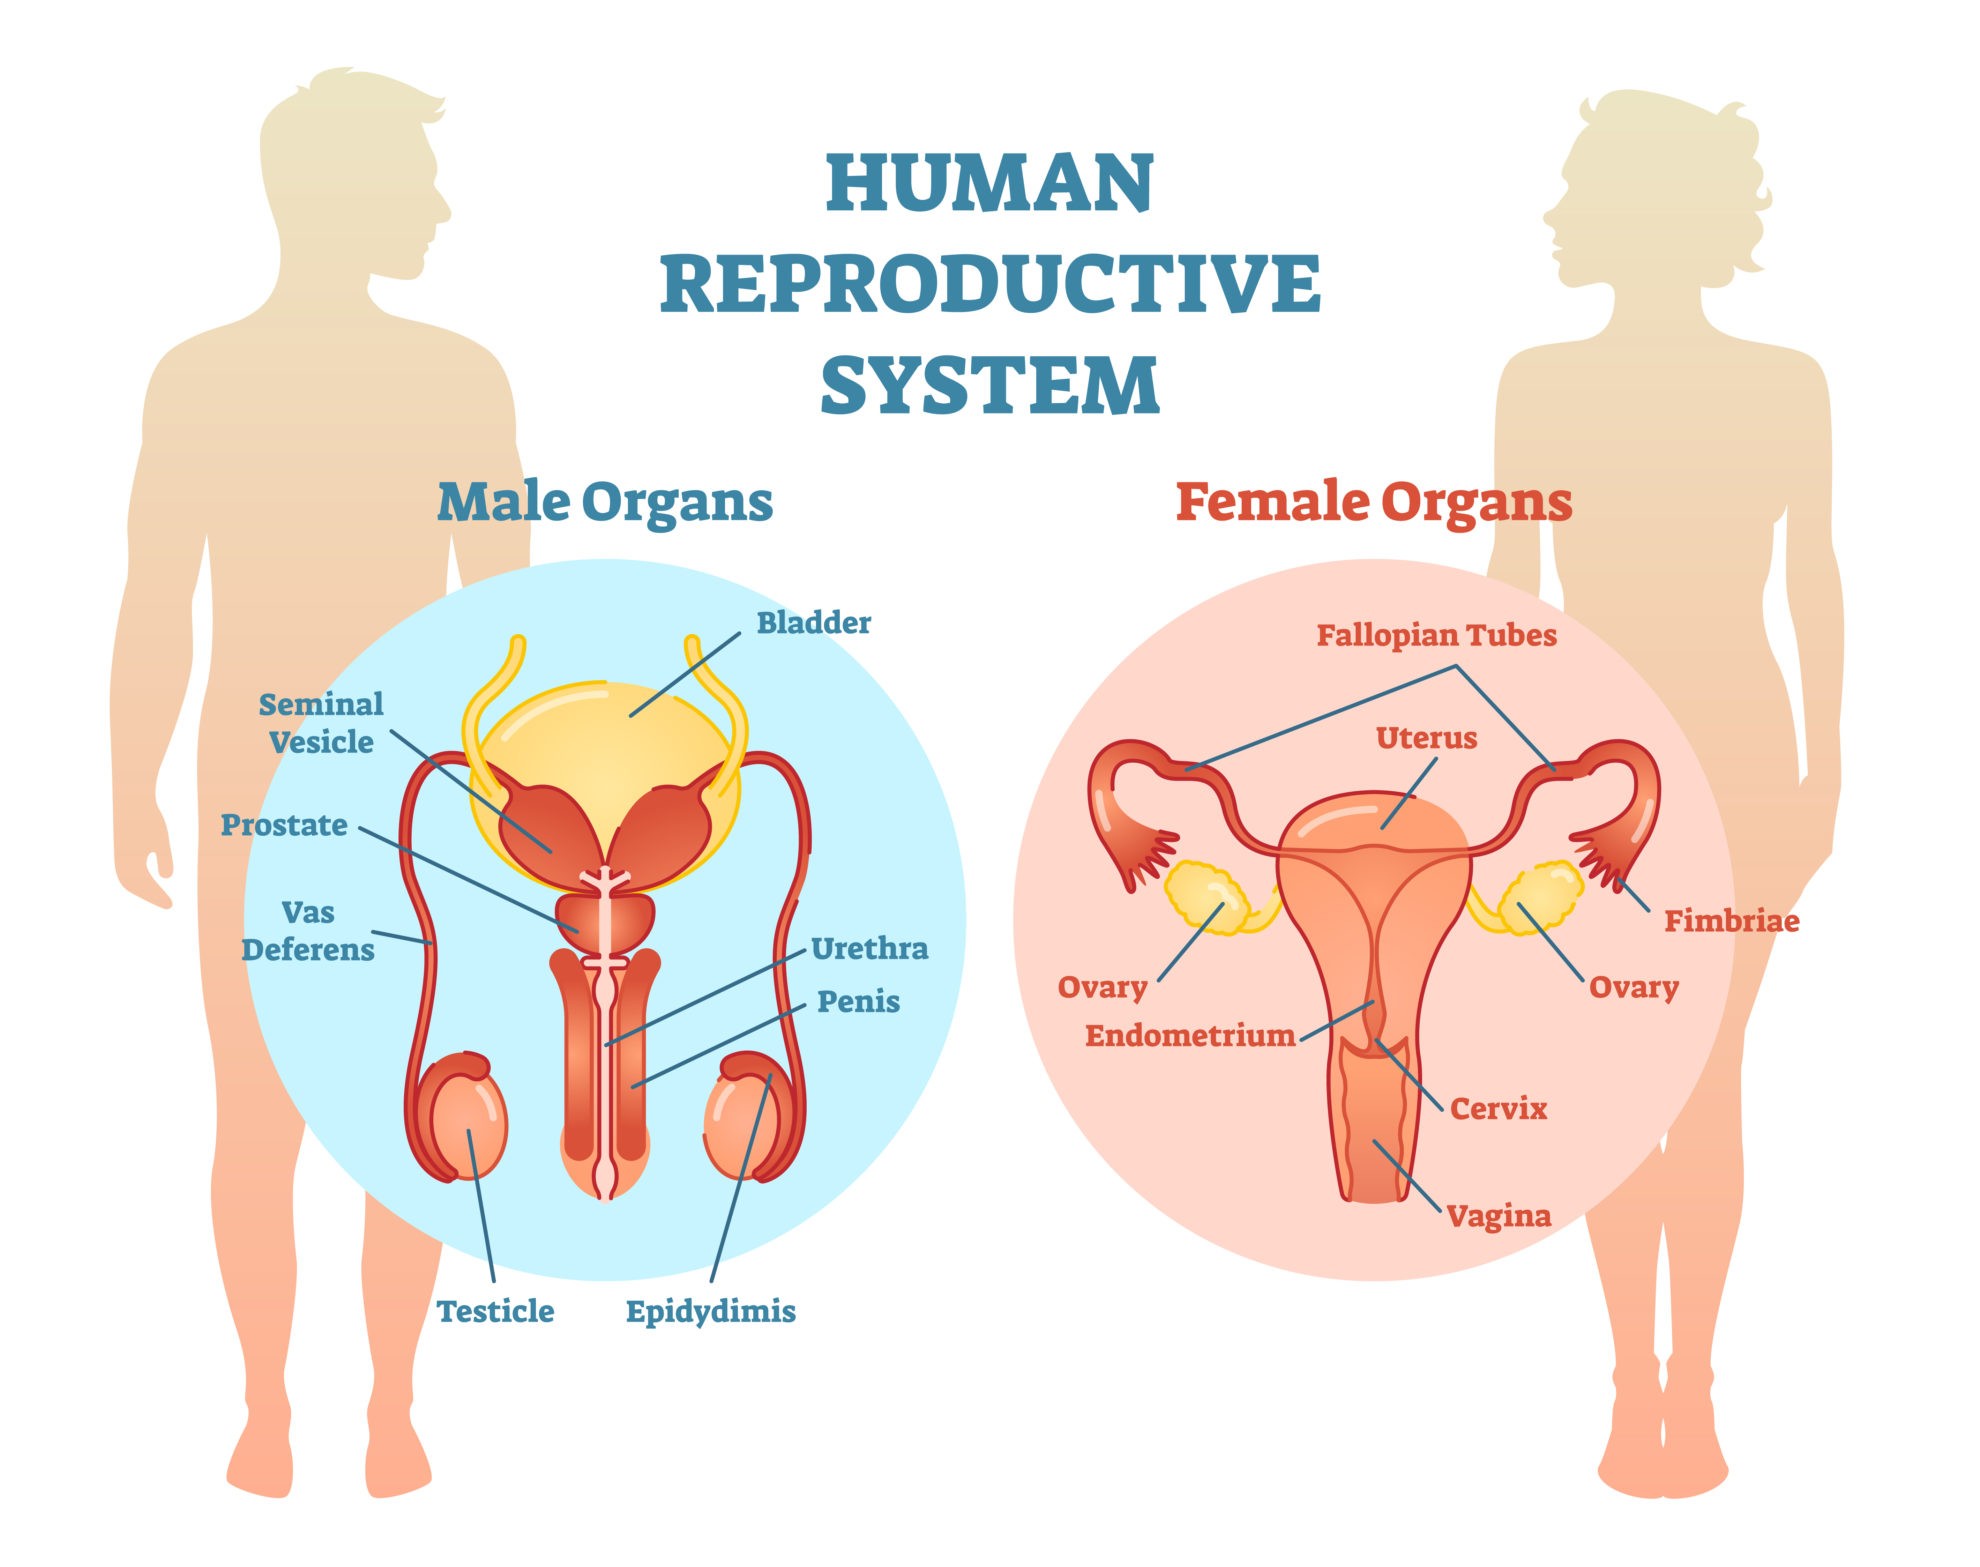 Male and Female Gonads: Testes and Ovaries